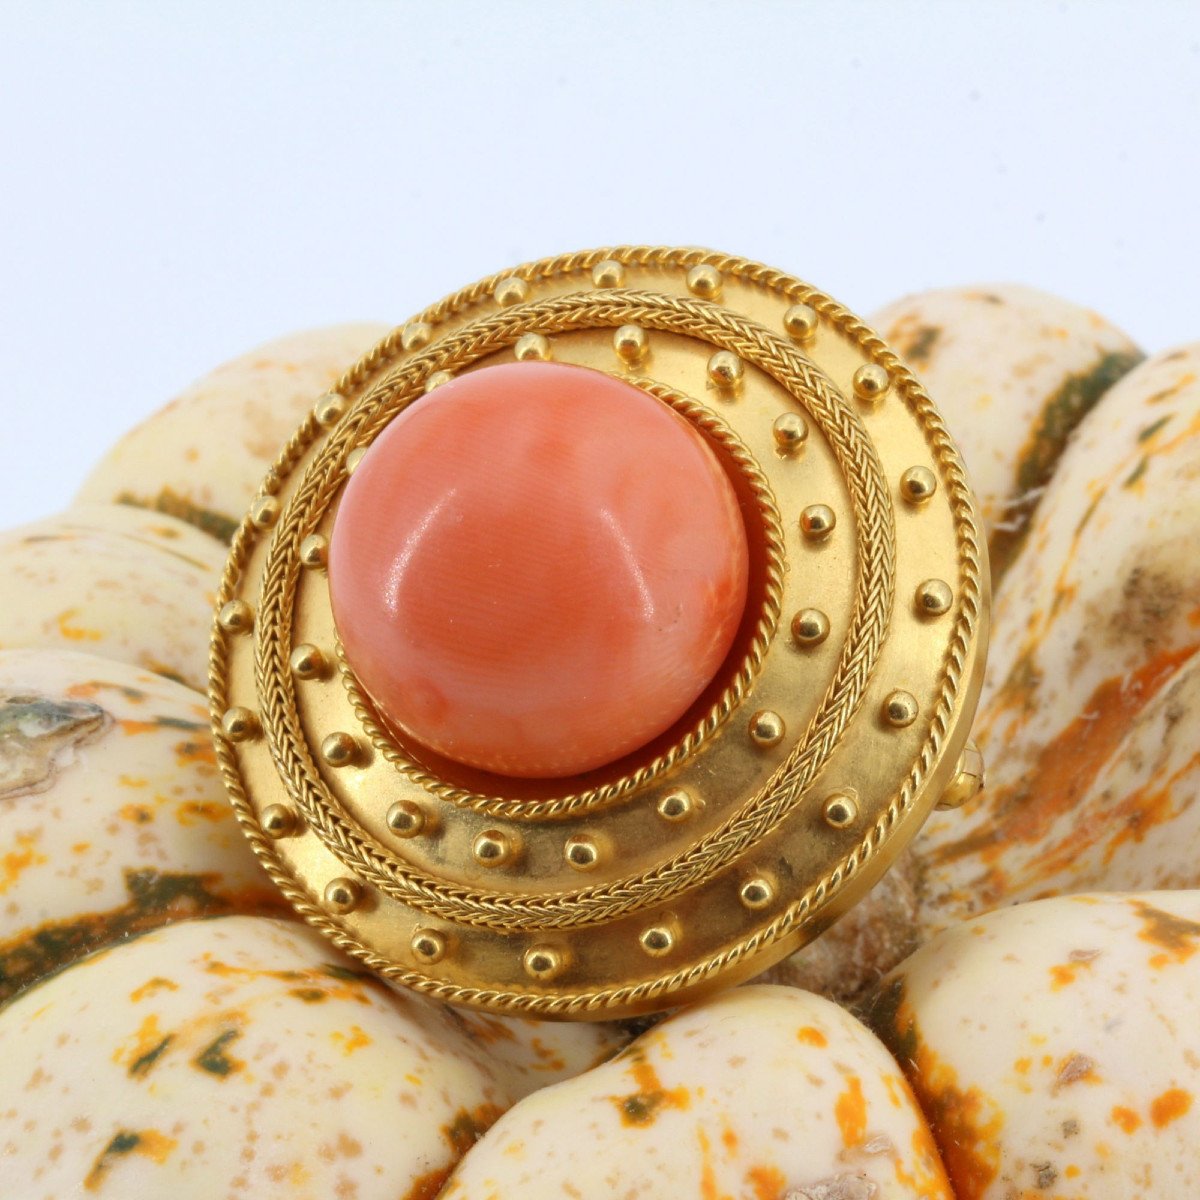 Antique Brooch In Matt Yellow Gold And Its Coral Pearl-photo-4